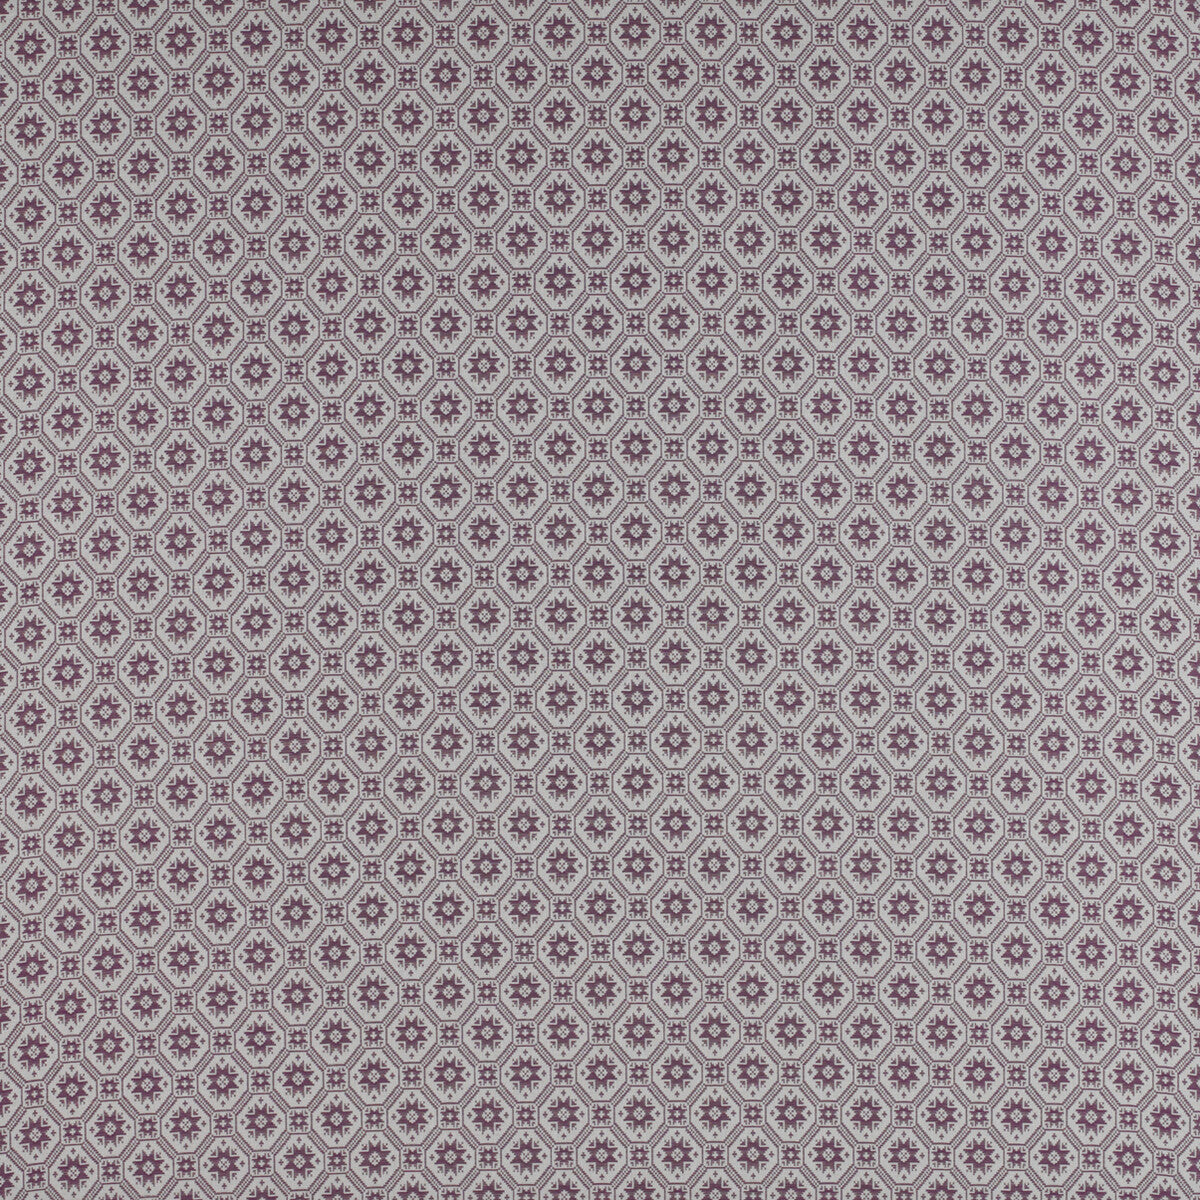 Delicias fabric in lavanda color - pattern GDT5198.006.0 - by Gaston y Daniela in the Madrid collection